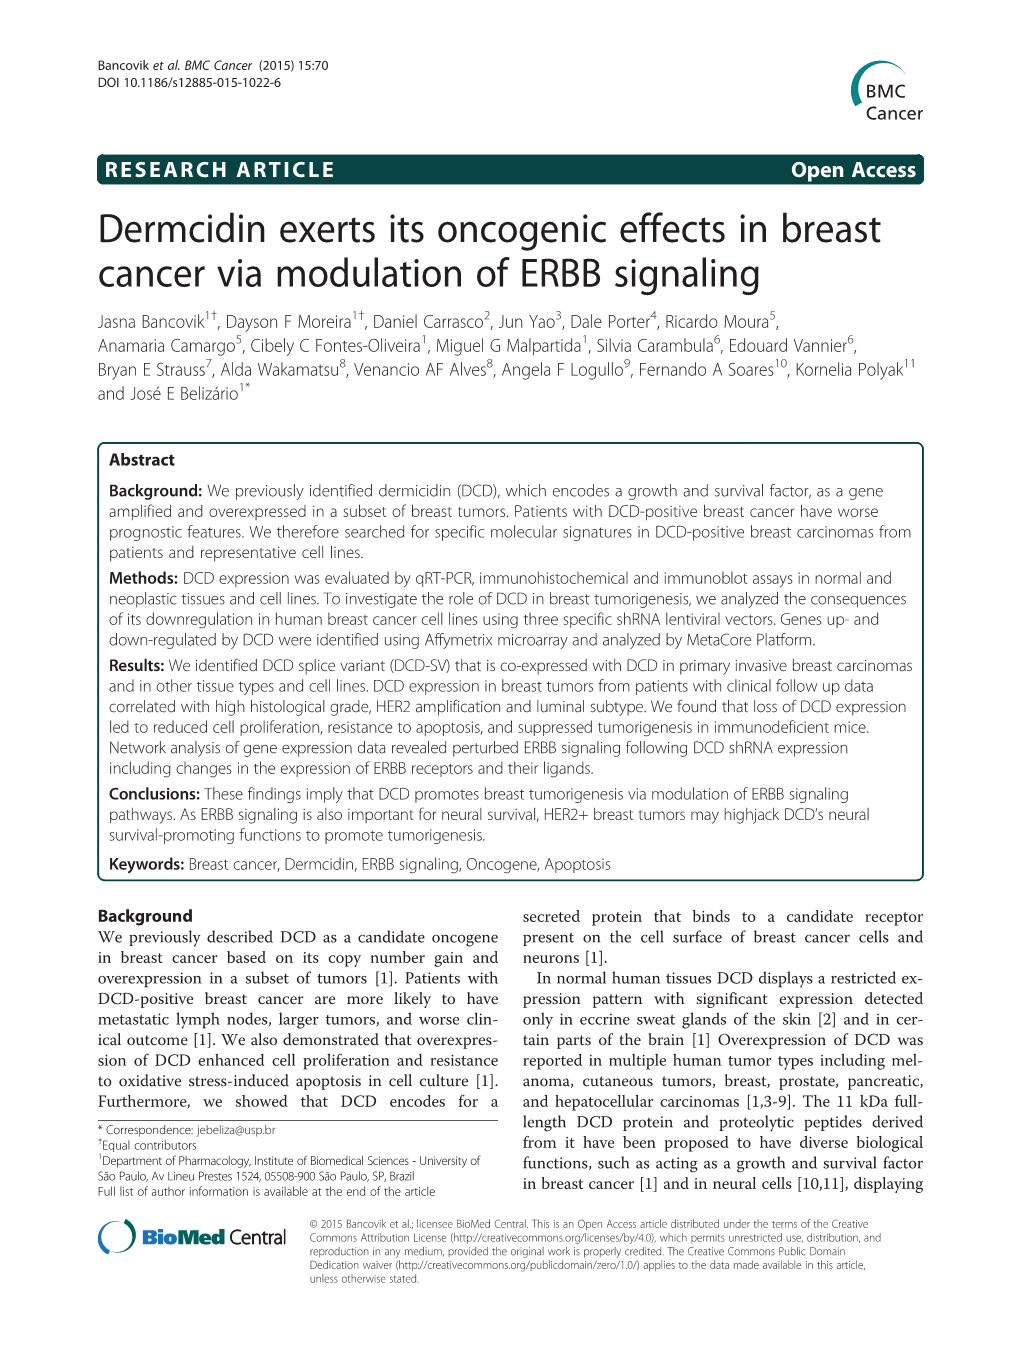 Dermcidin Exerts Its Oncogenic Effects in Breast Cancer Via Modulation Of